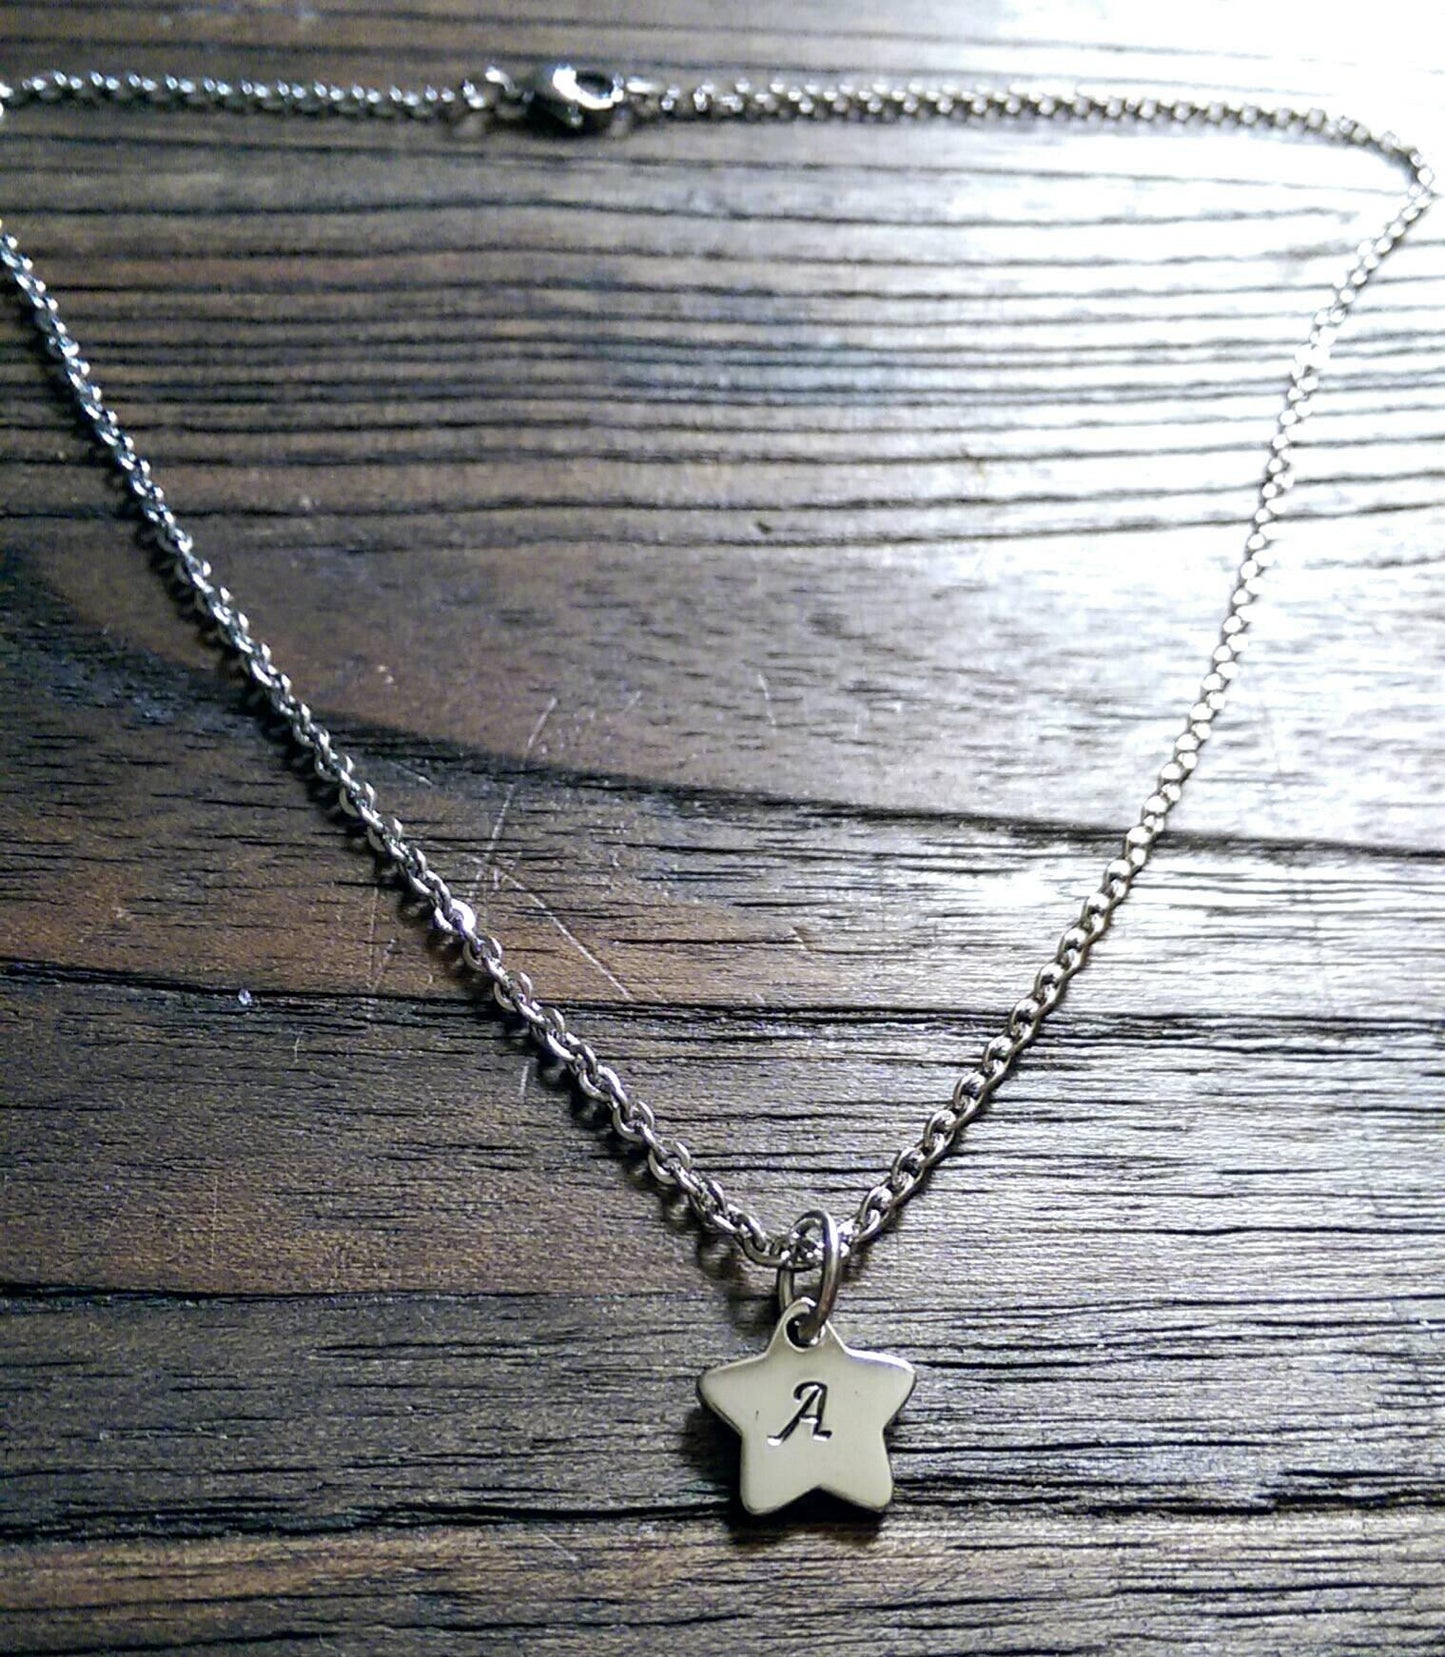 Personalised Hand Stamped Star Initial Necklace Pendant Stainless Steel. - Silver and Resin Designs